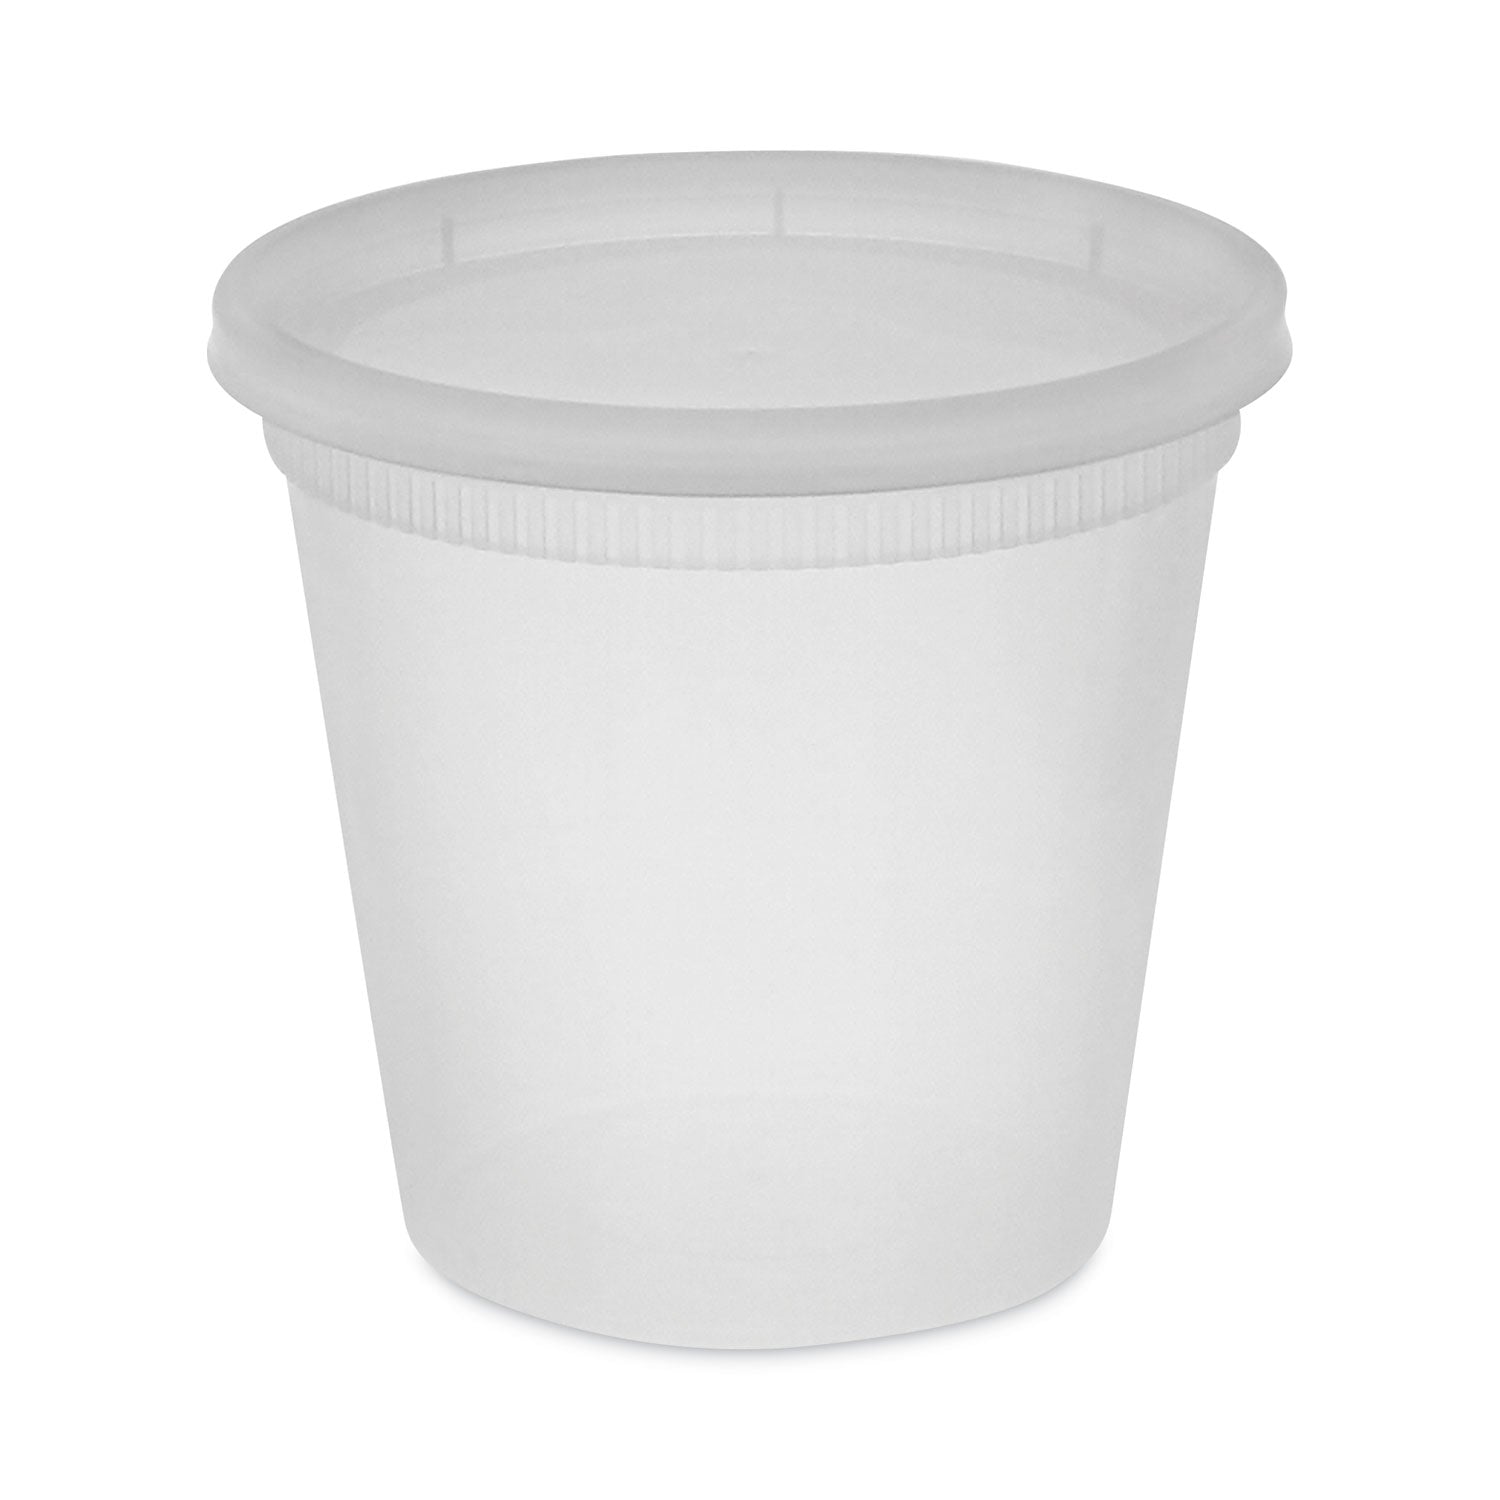 newspring-delitainer-microwavable-container-24-oz-455-x-455-x-435-clear-plastic-240-carton_pctyl2524 - 1